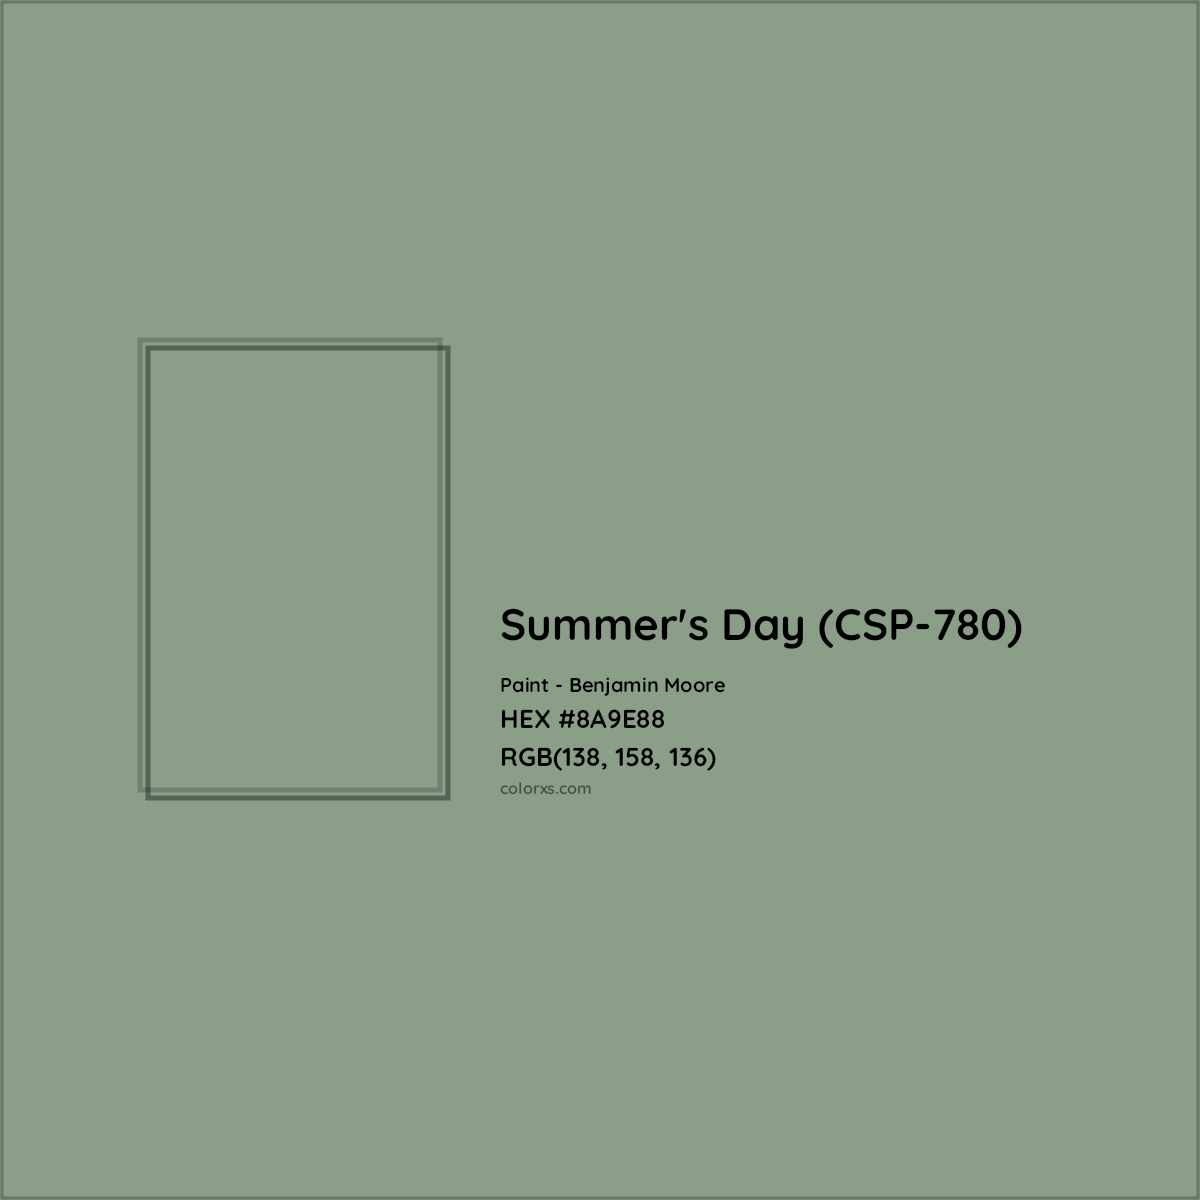 HEX #8A9E88 Summer's Day (CSP-780) Paint Benjamin Moore - Color Code